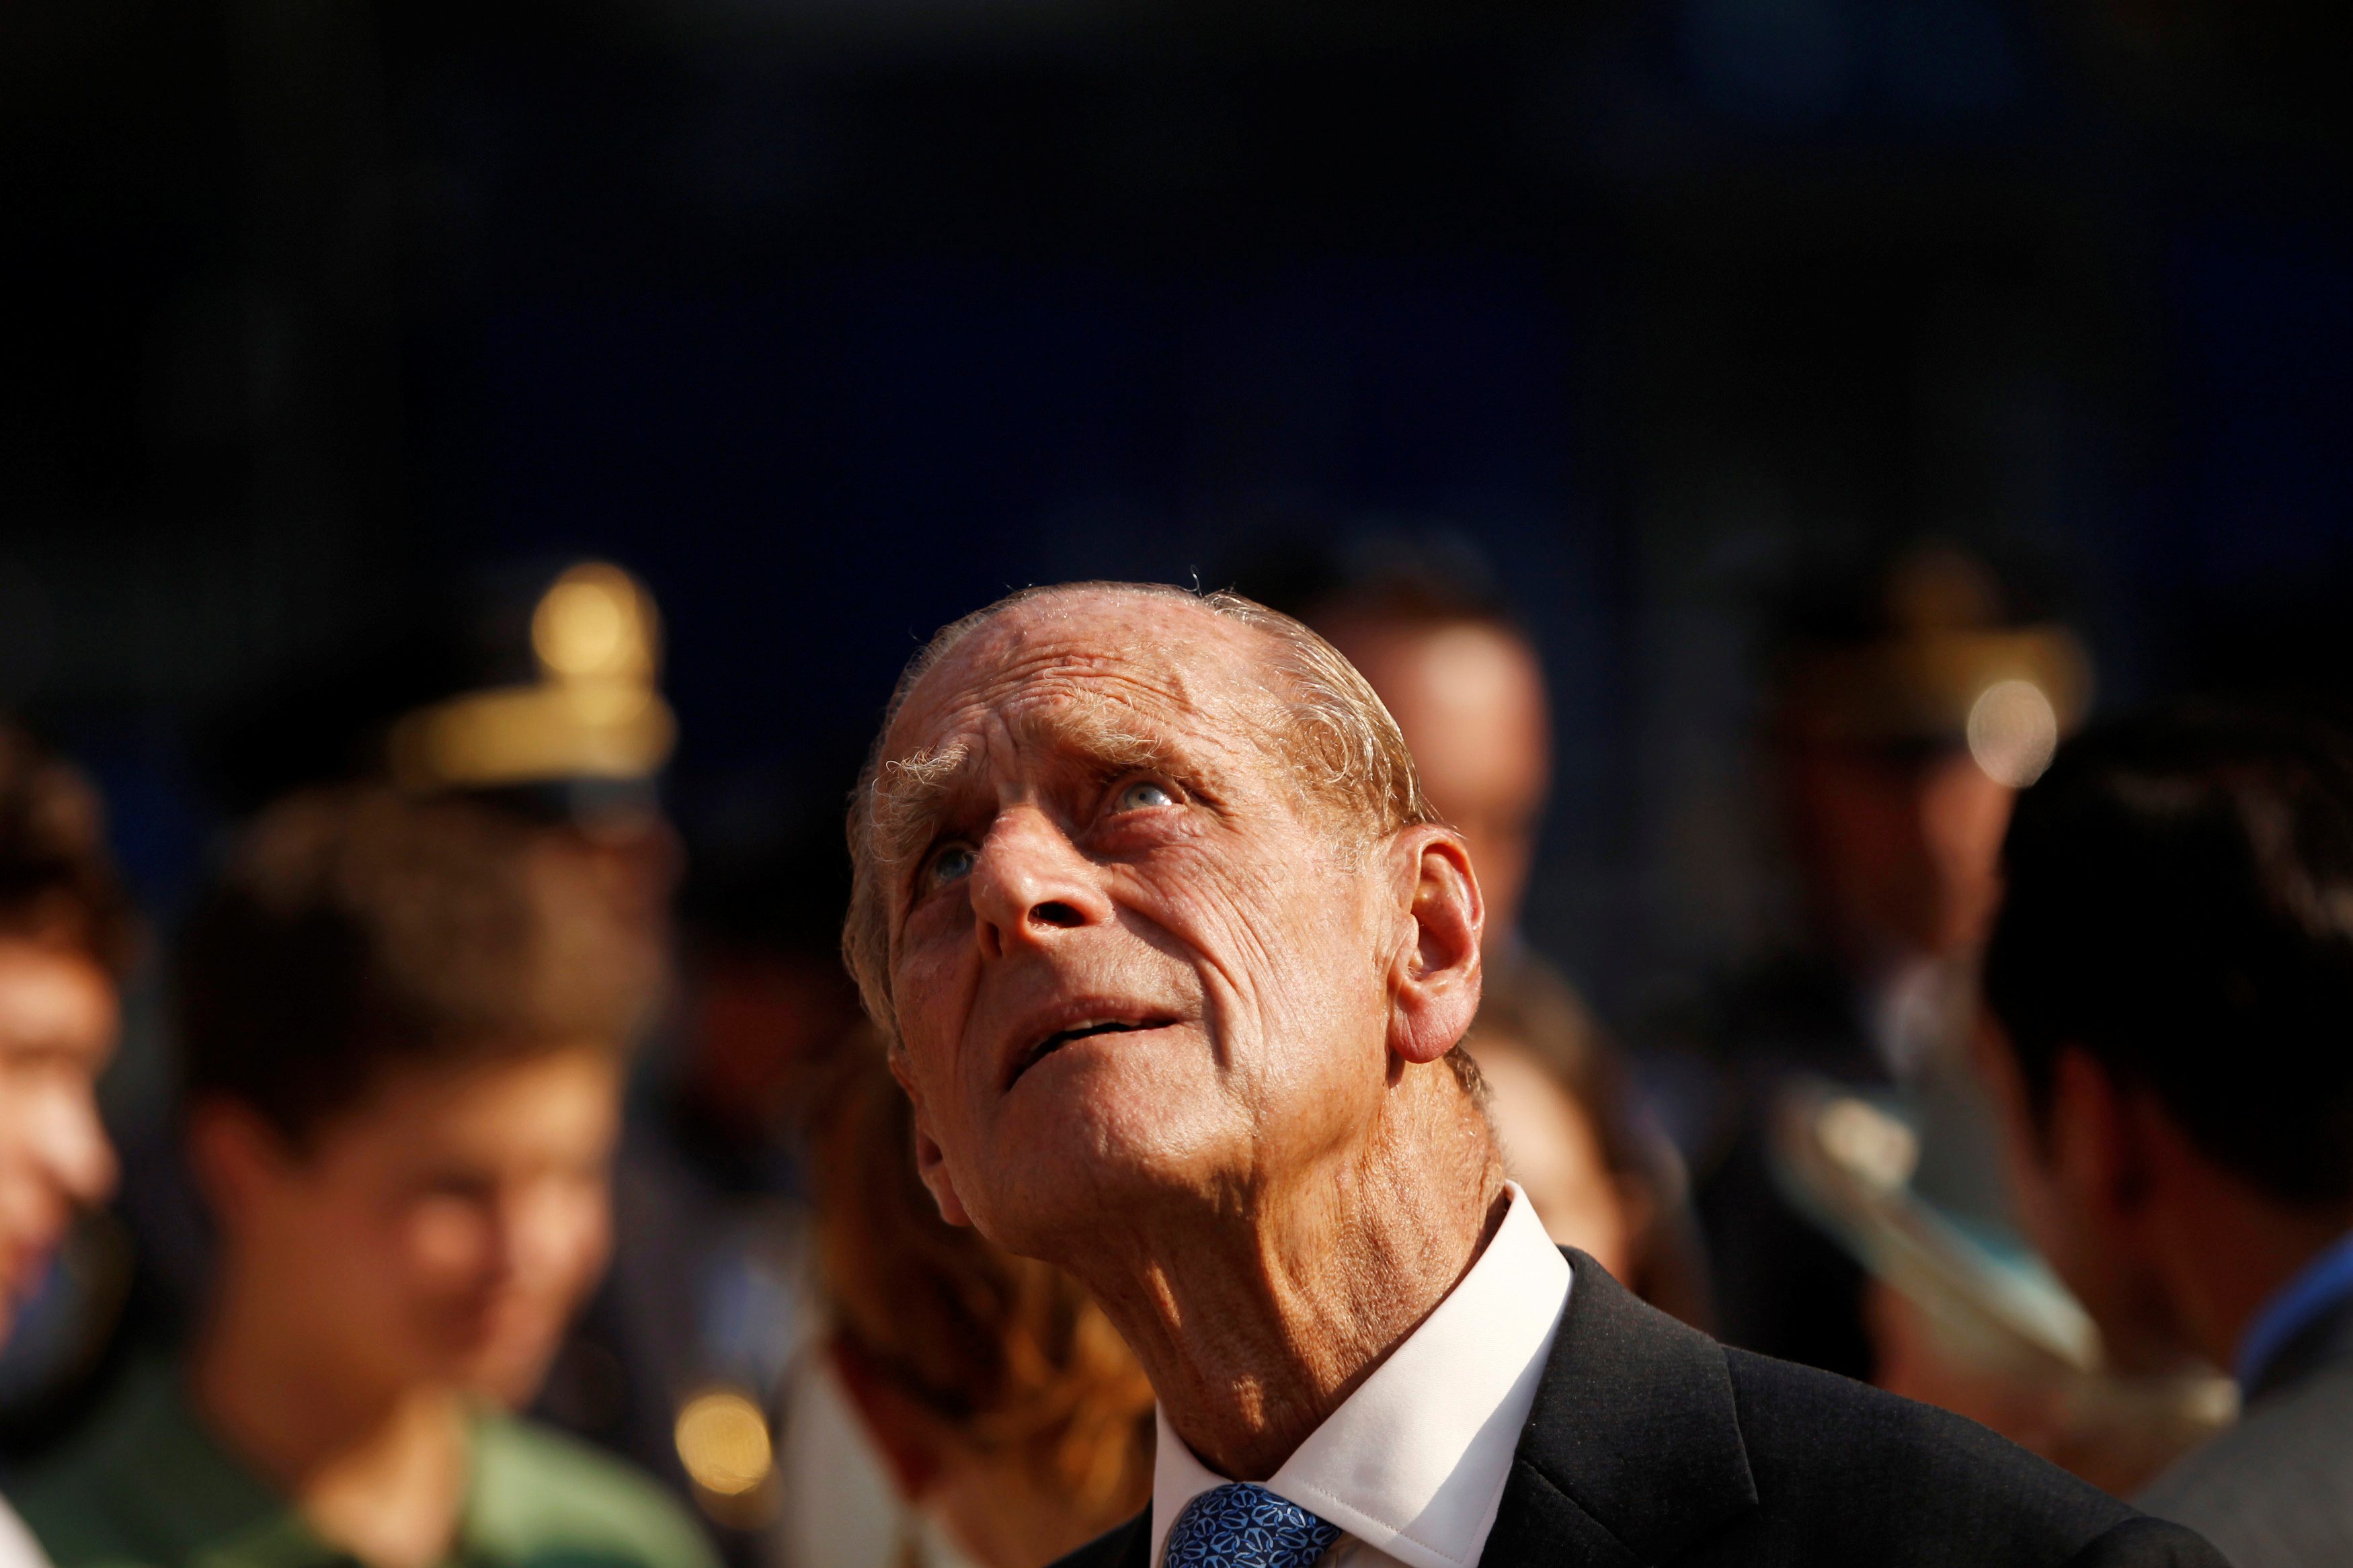 Prince Philip was the gruff figure at heart of Britain’s monarchy